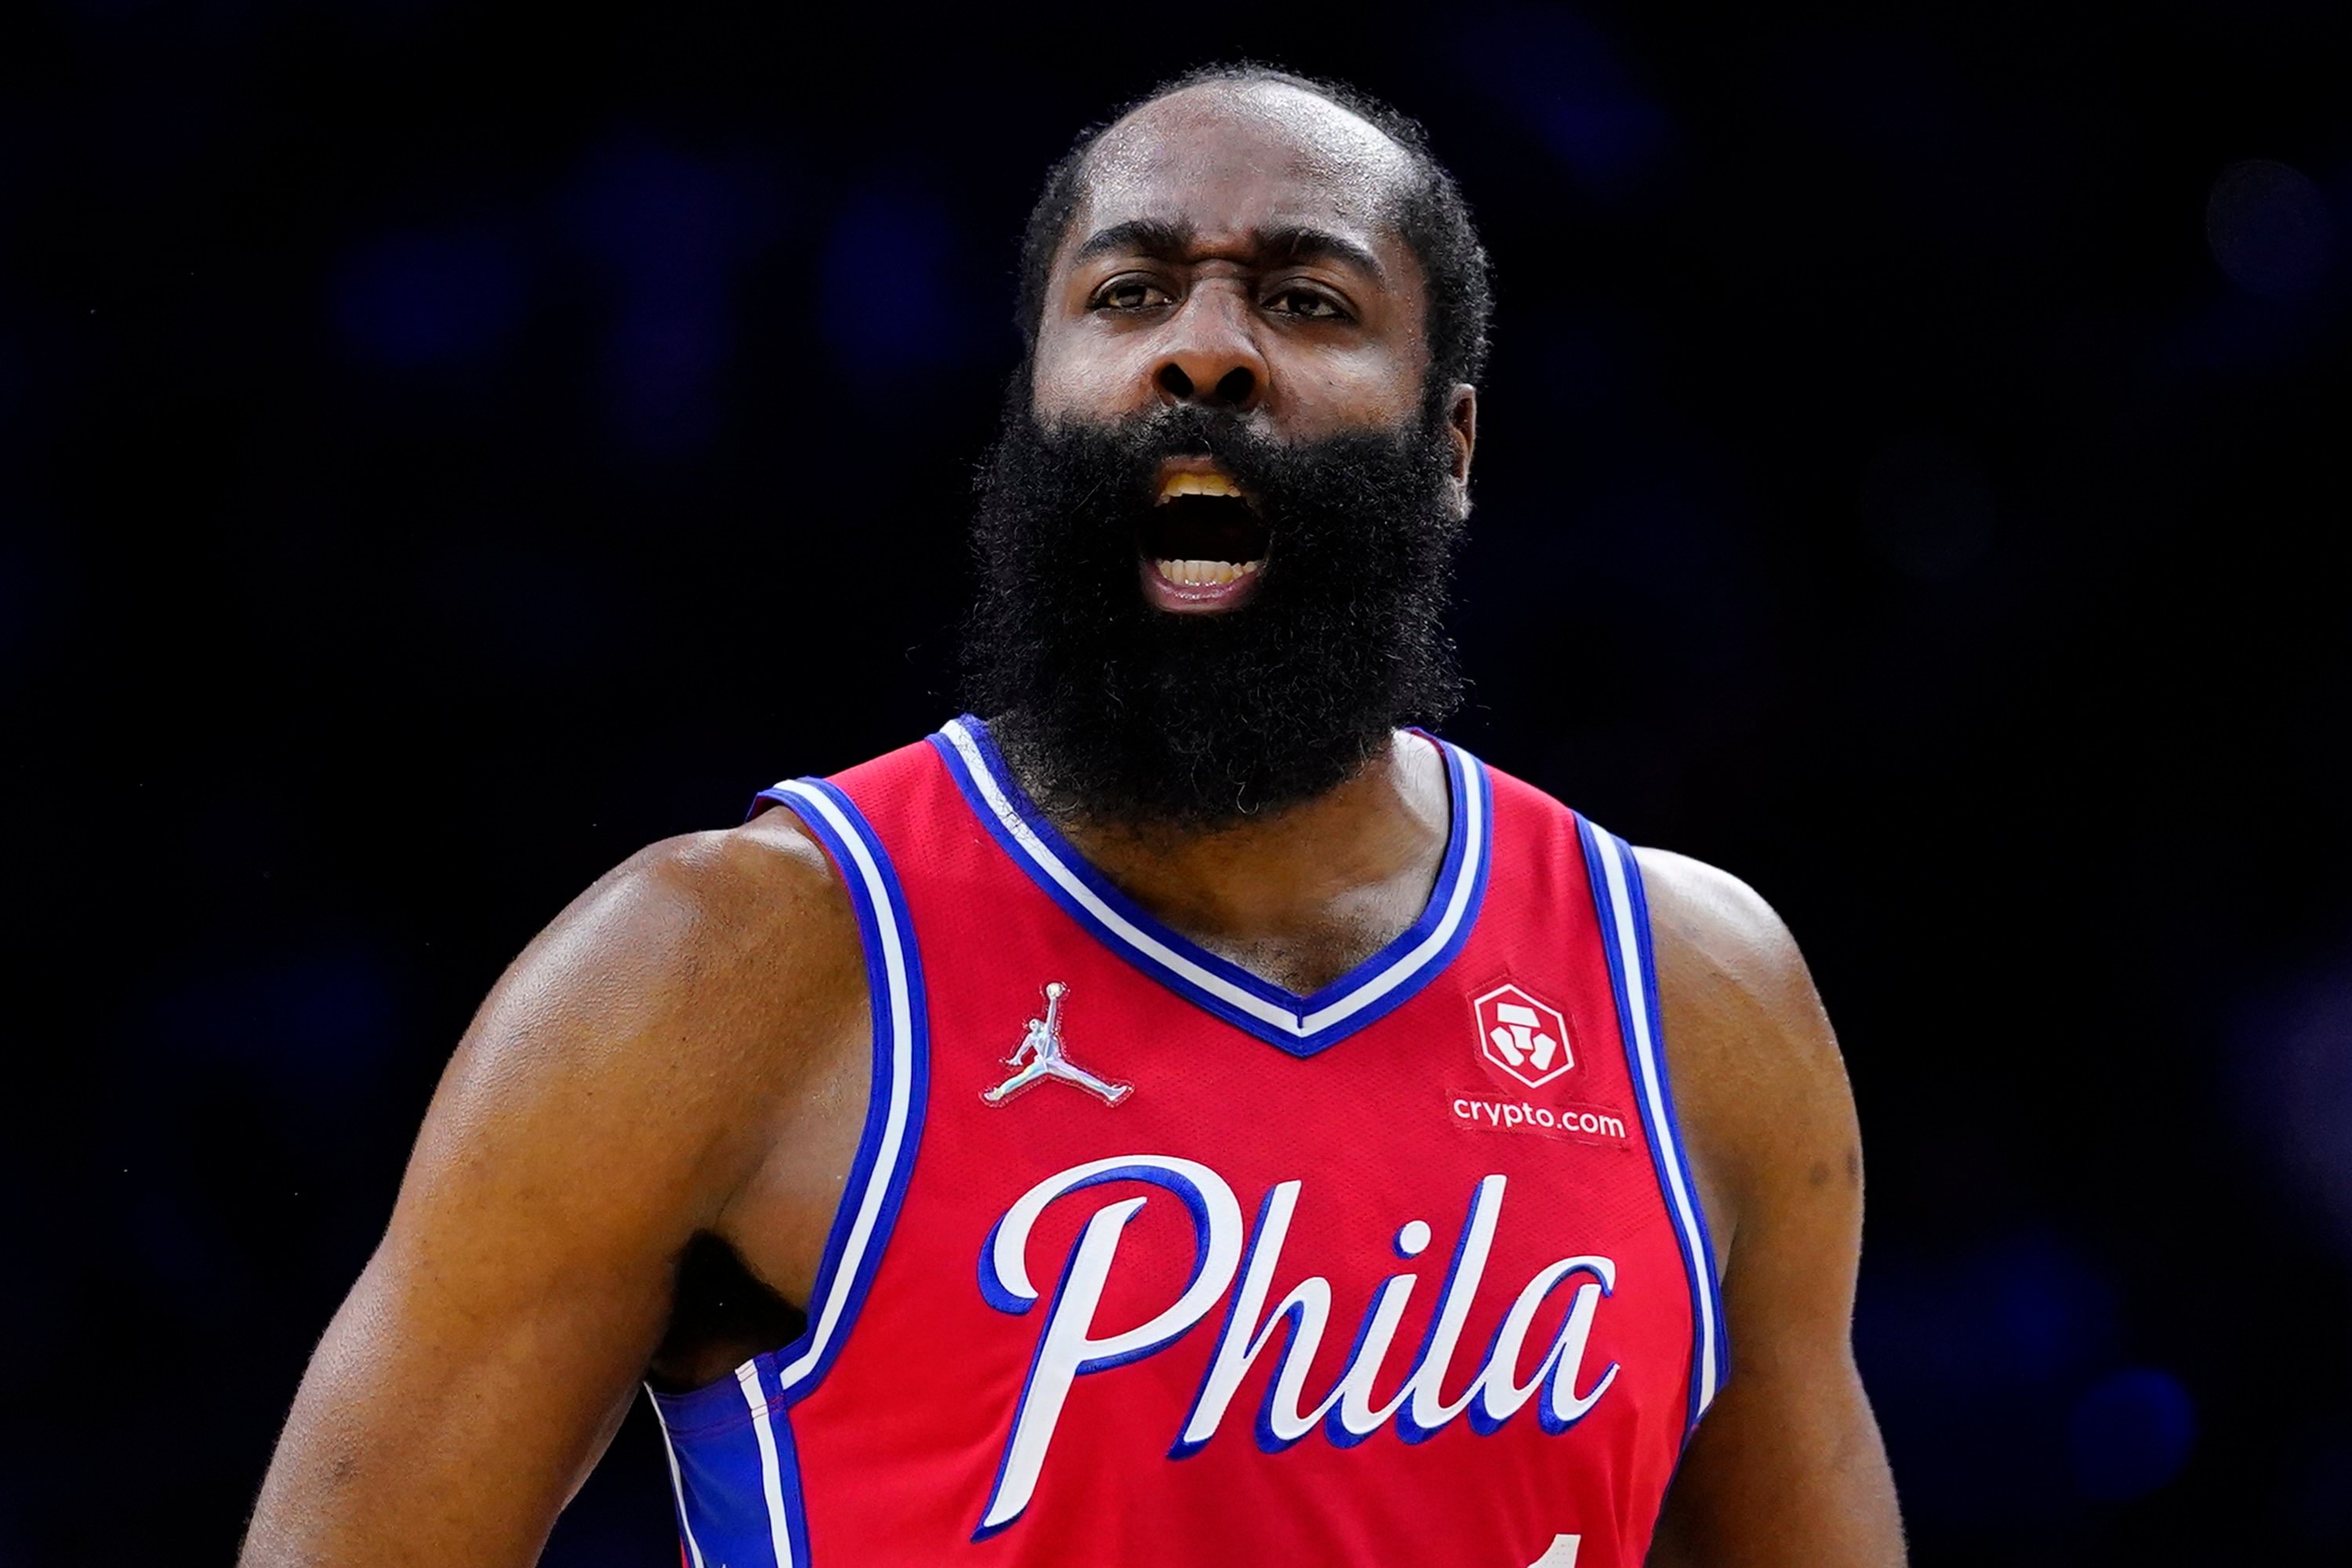 James Harden planning to play in China after NBA?